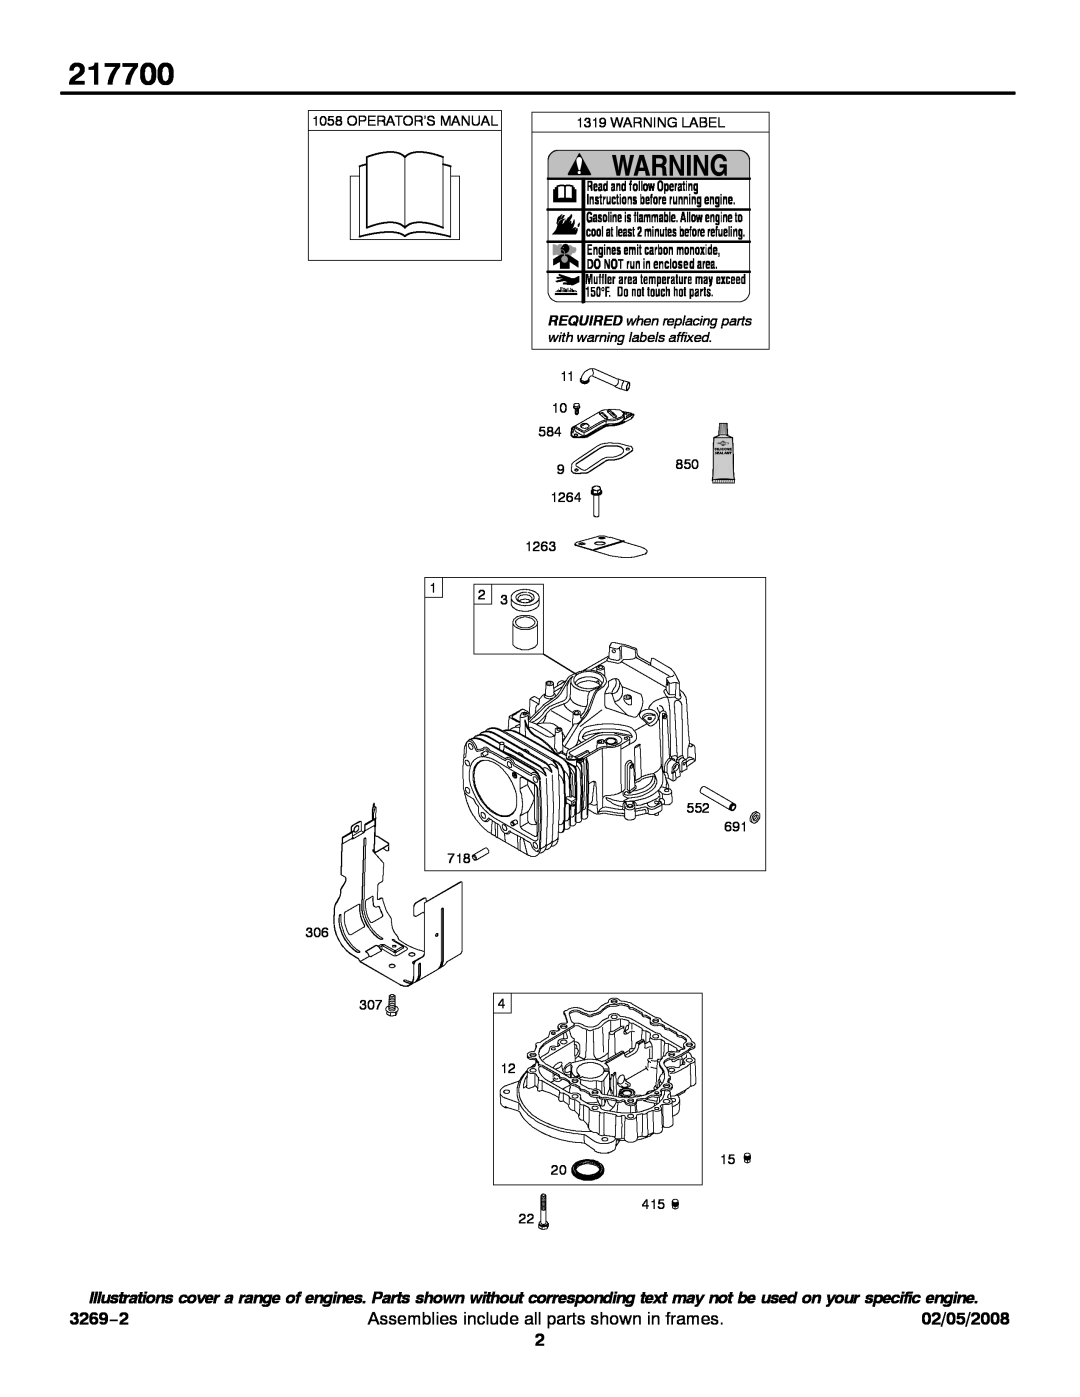 Briggs & Stratton 217700 service manual 3269−2, Assemblies include all parts shown in frames, 02/05/2008 